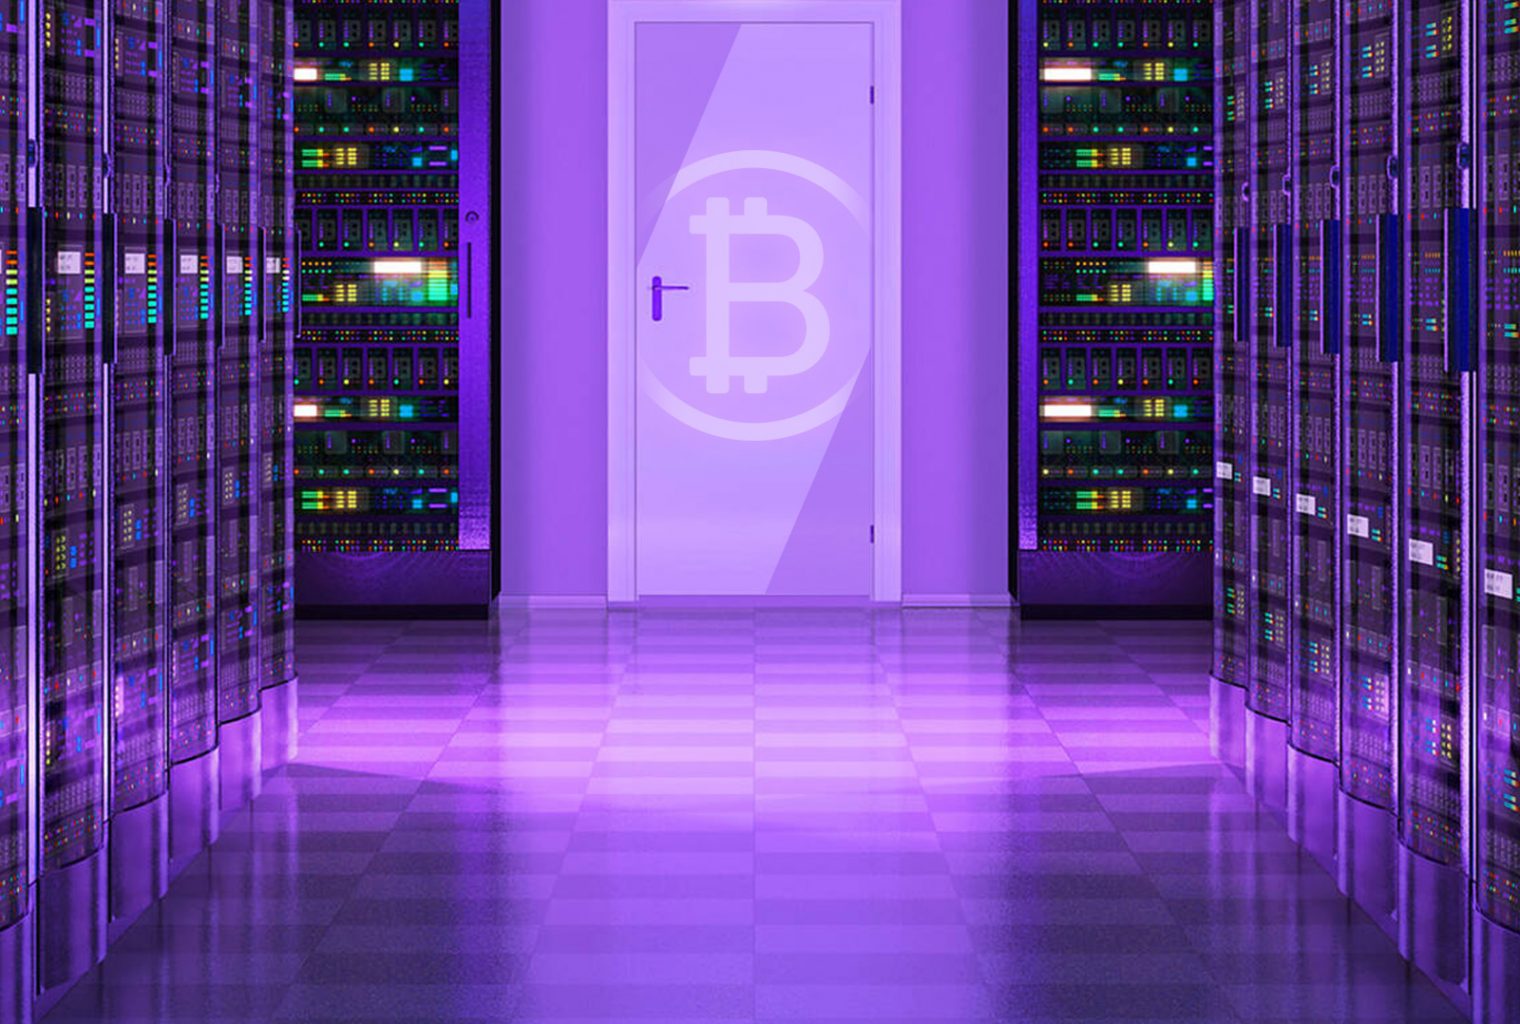 A Look At Some Of The Next Generation Bitcoin Mining Rigs - 